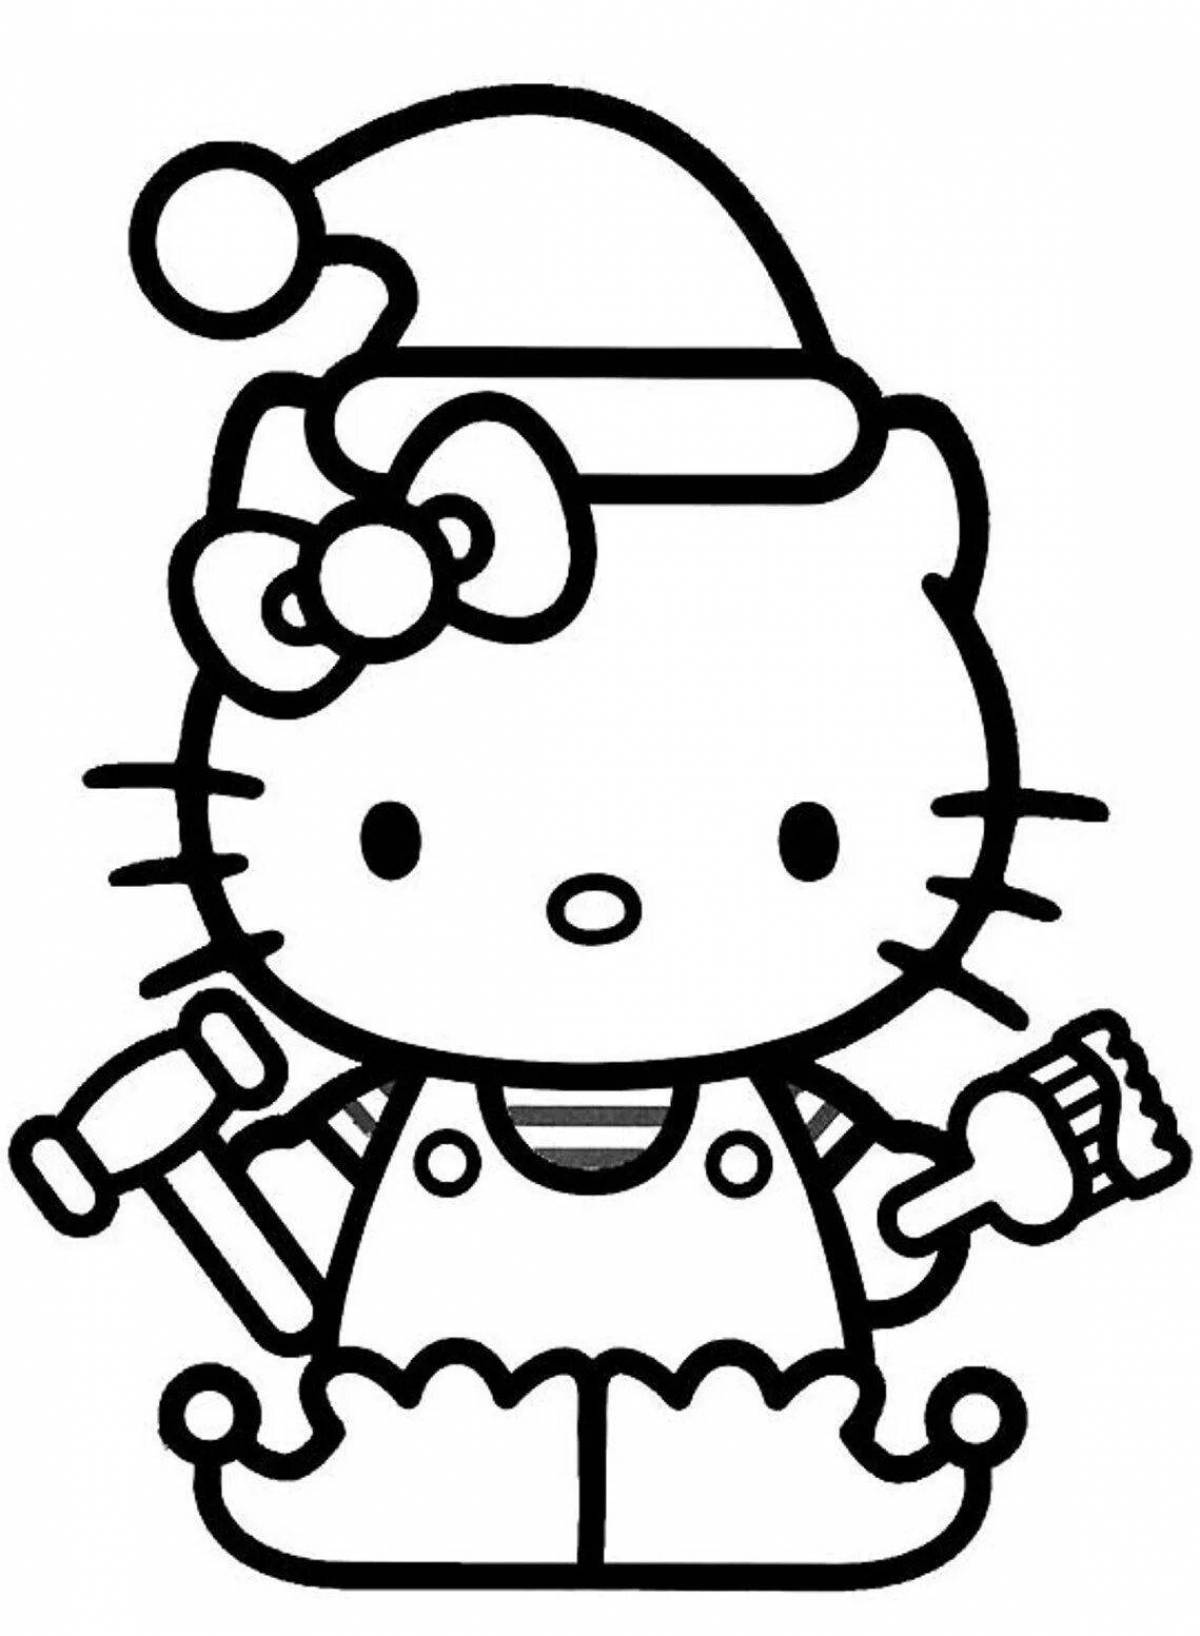 Sweet coloring hello kitty and her friends